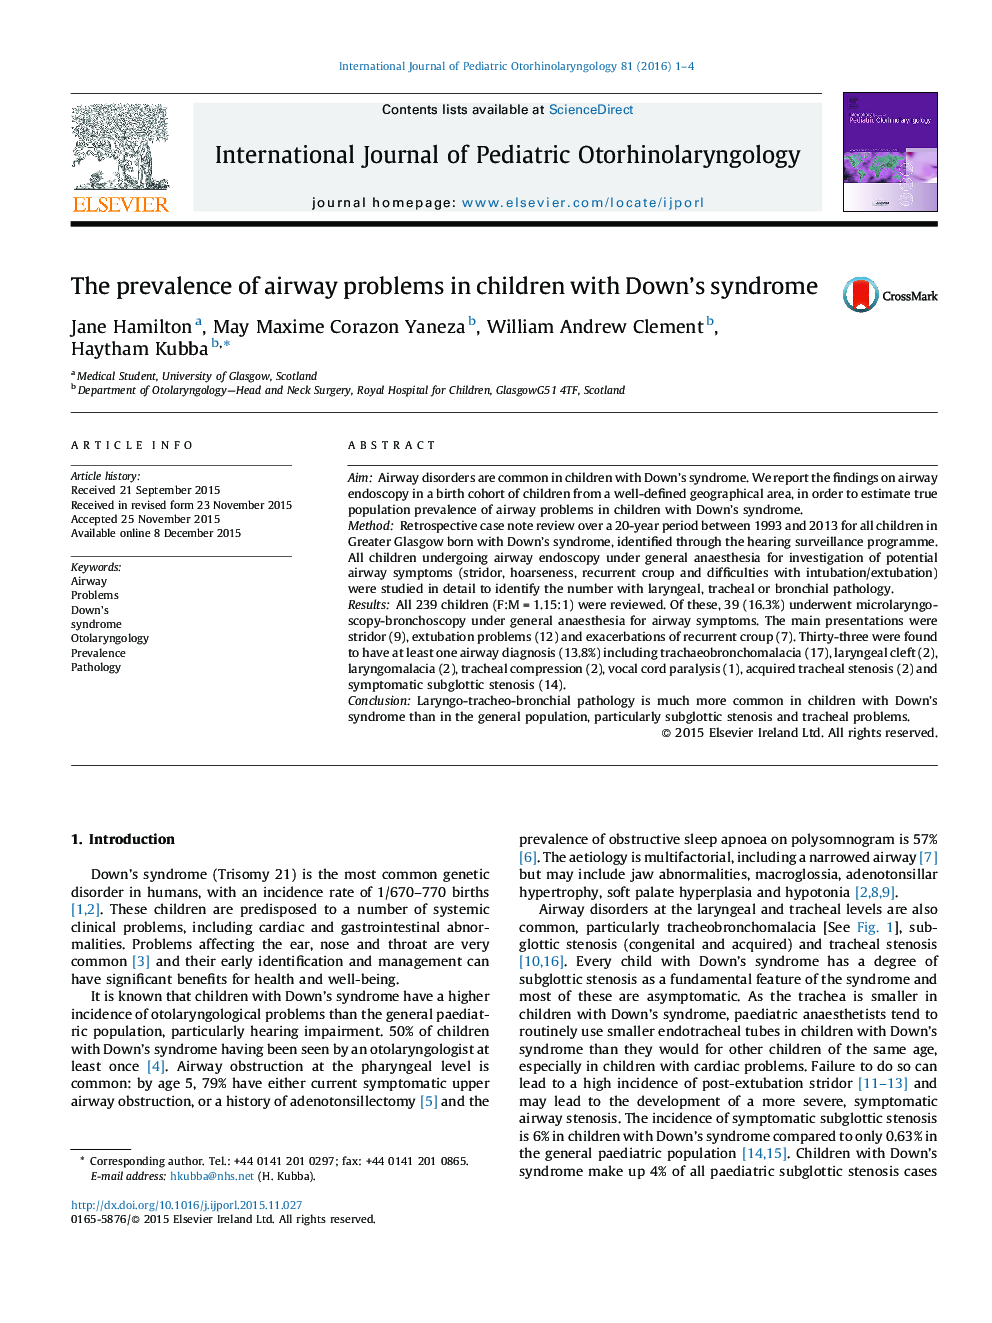 The prevalence of airway problems in children with Down's syndrome